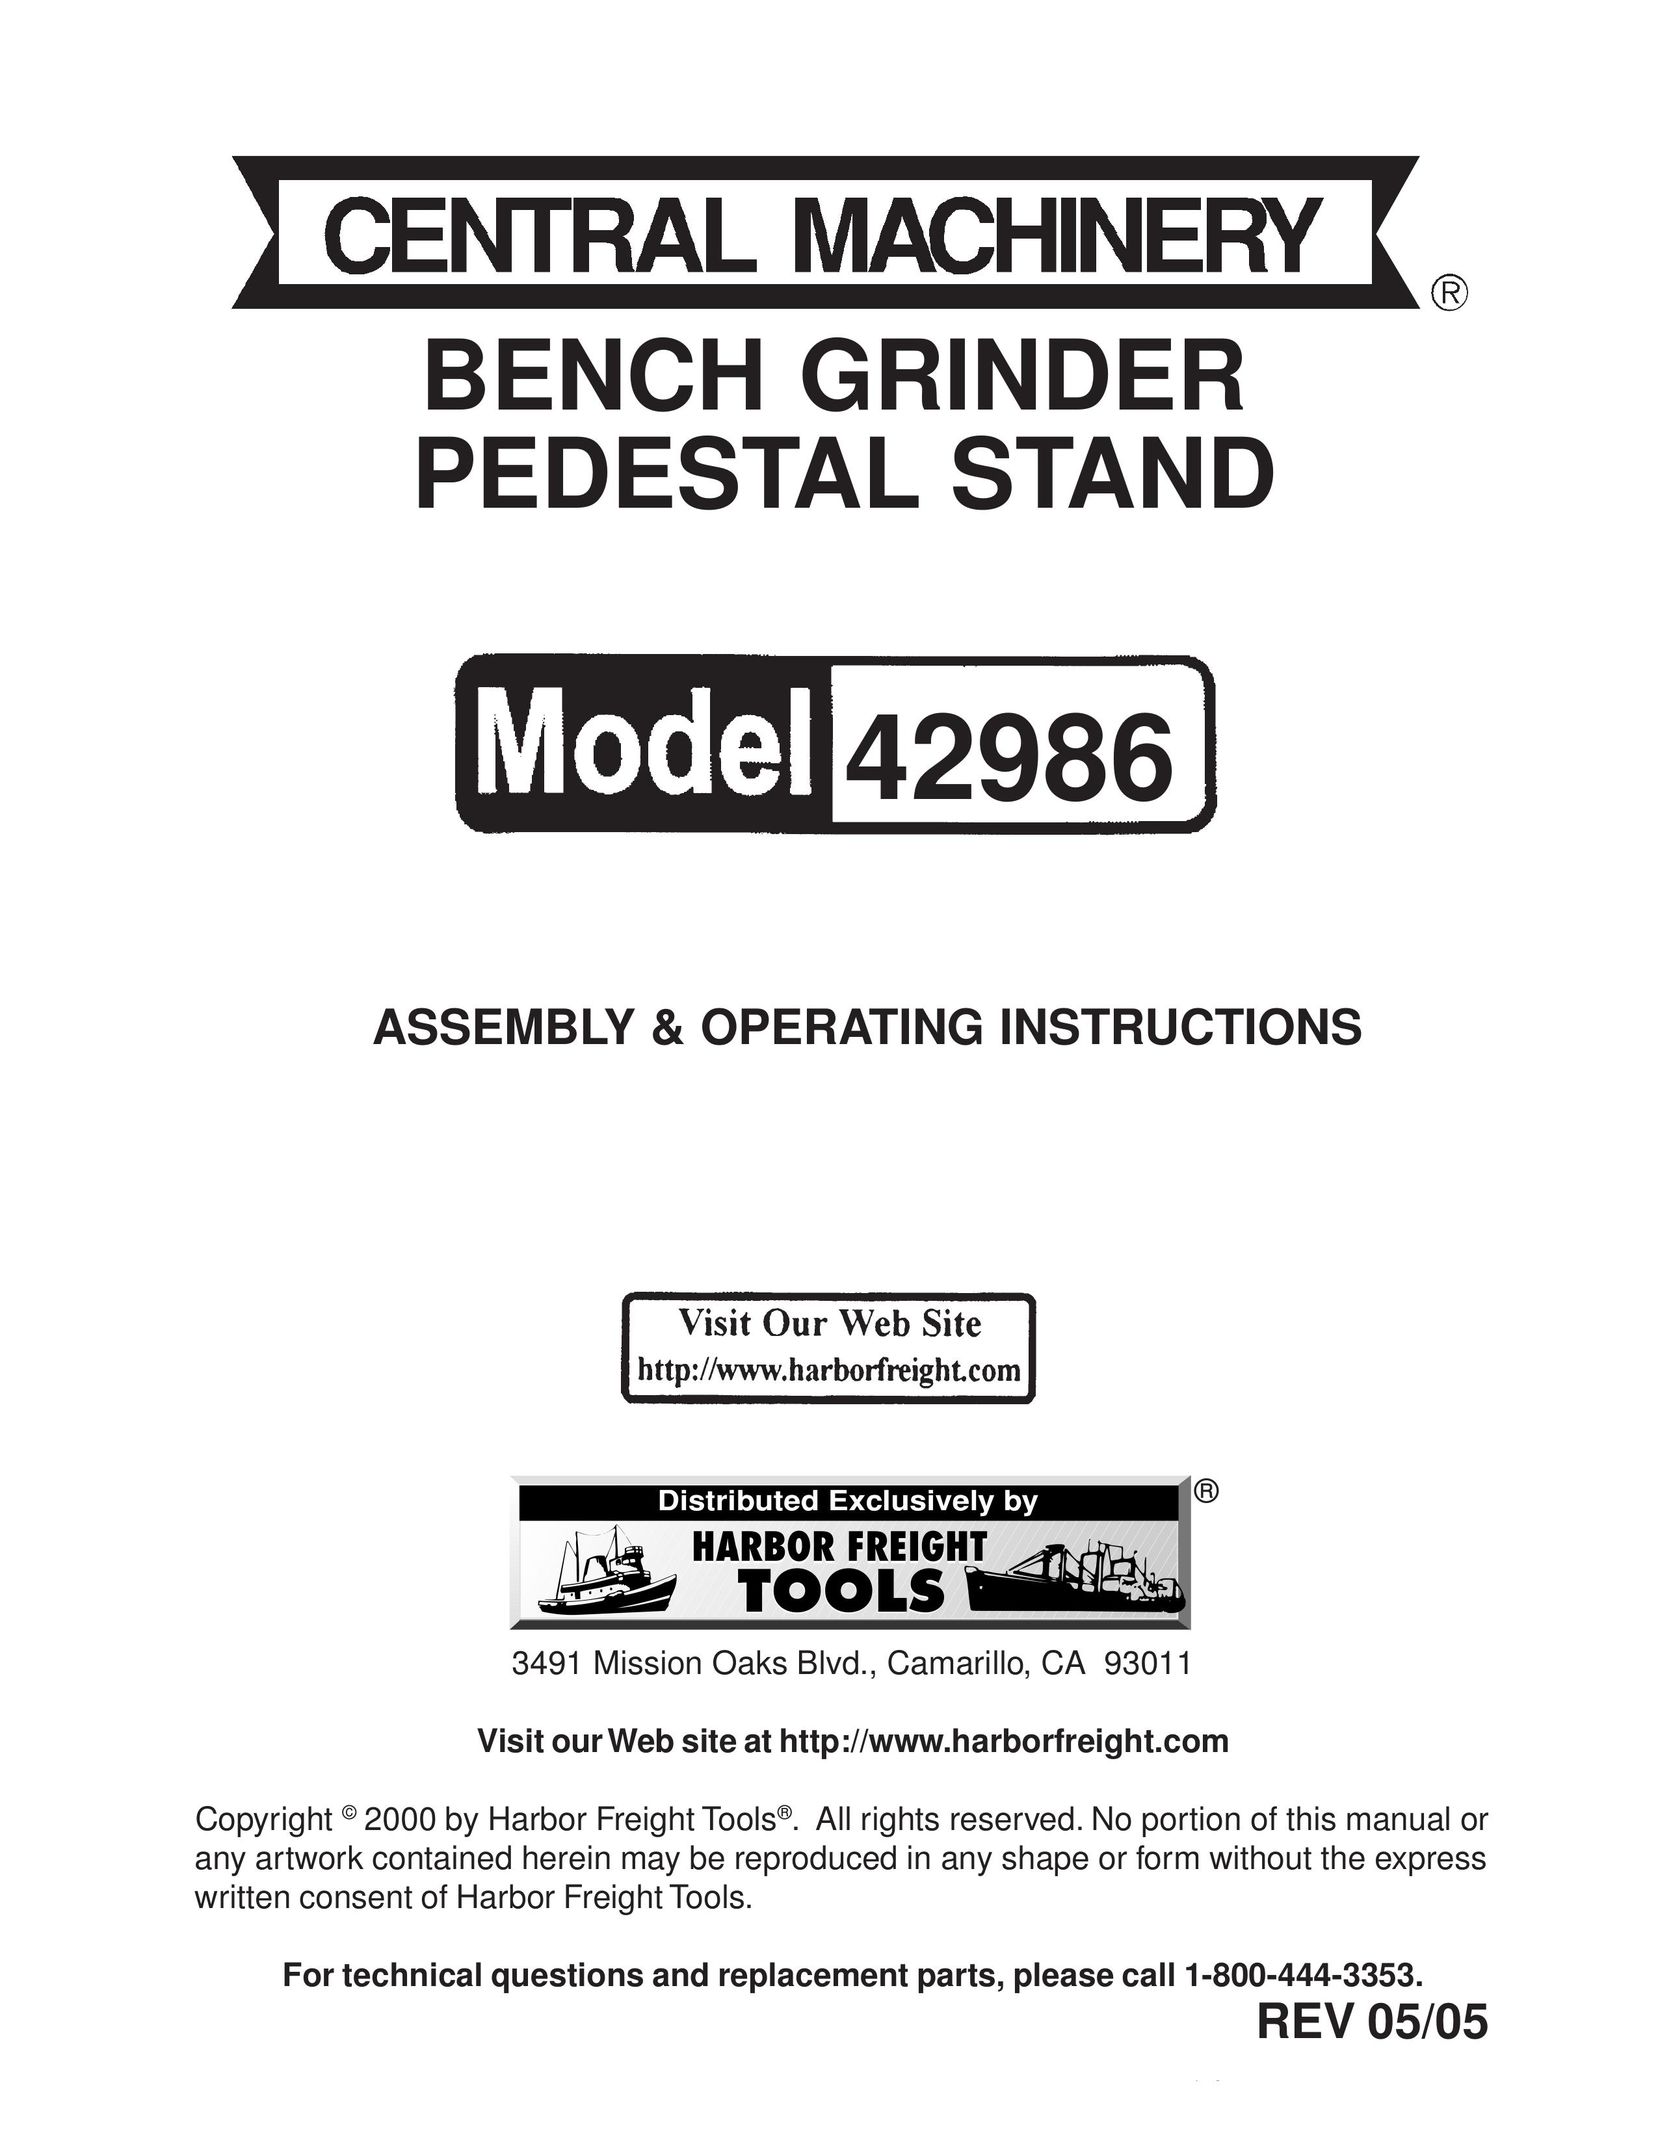 Harbor Freight Tools 42986 Grinder User Manual